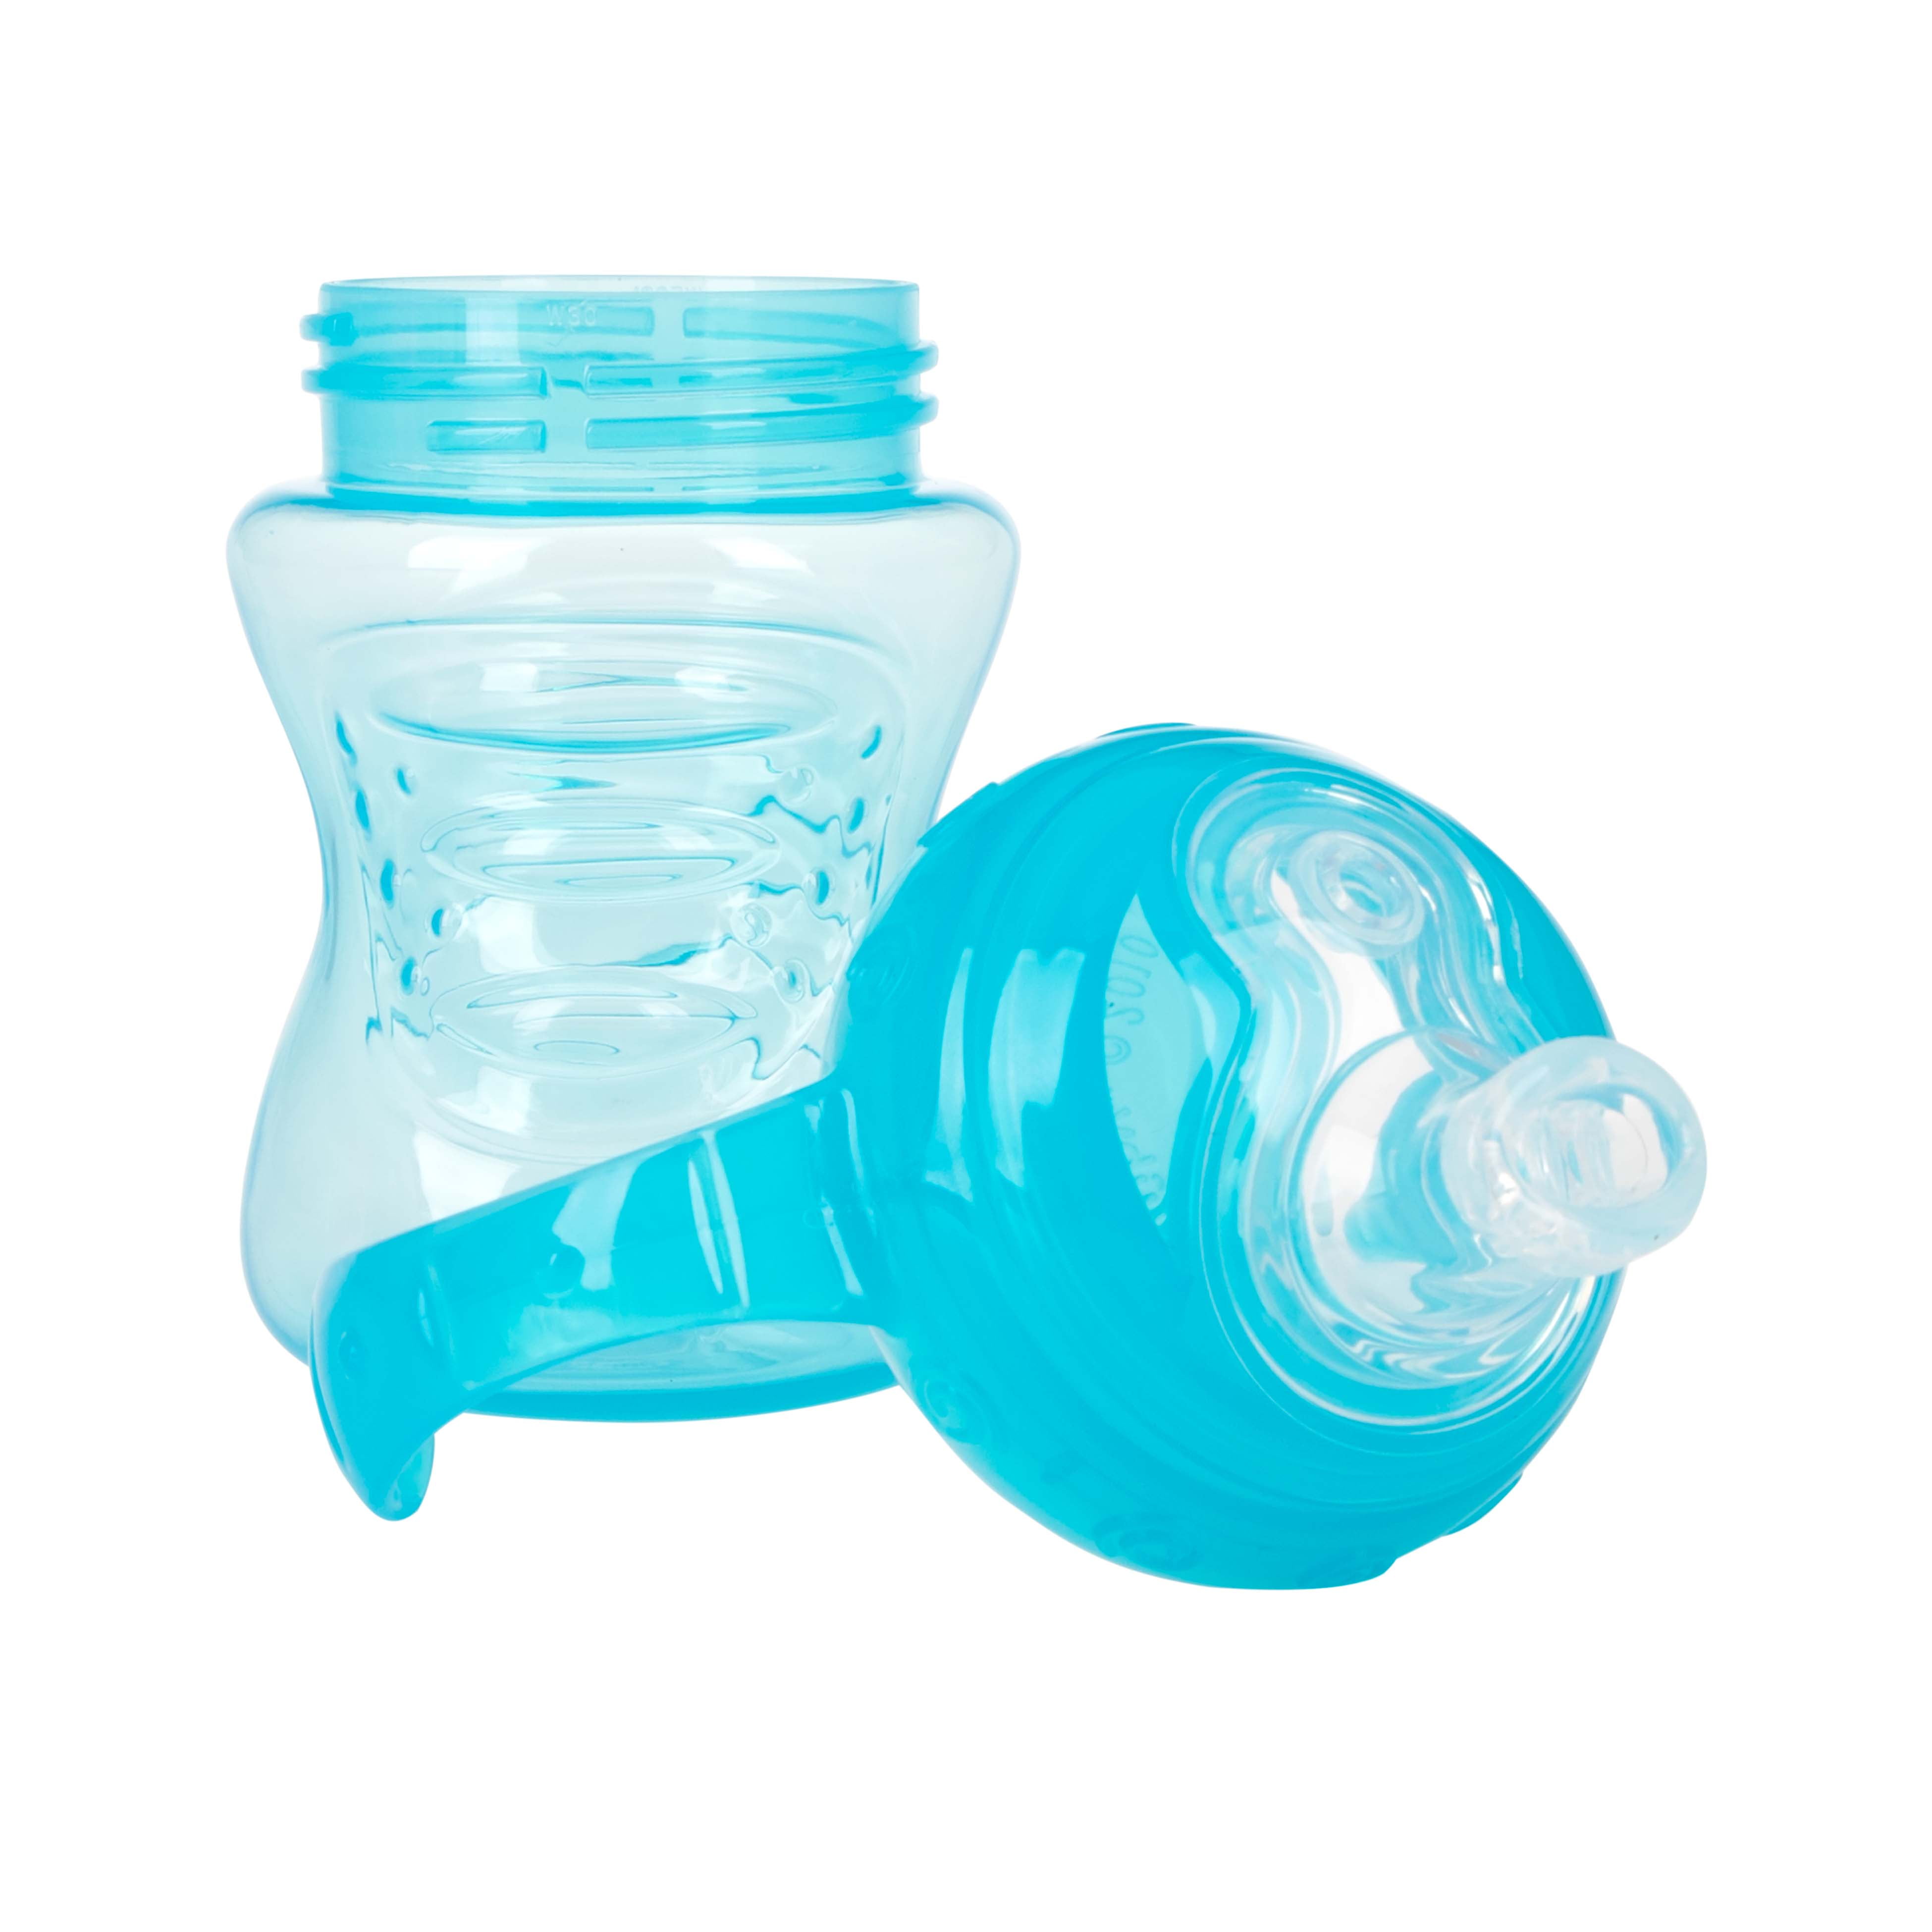 Worry-Free Sips with Sport Sipper: Non-Spill Sippy Cup for Kids – Nuby